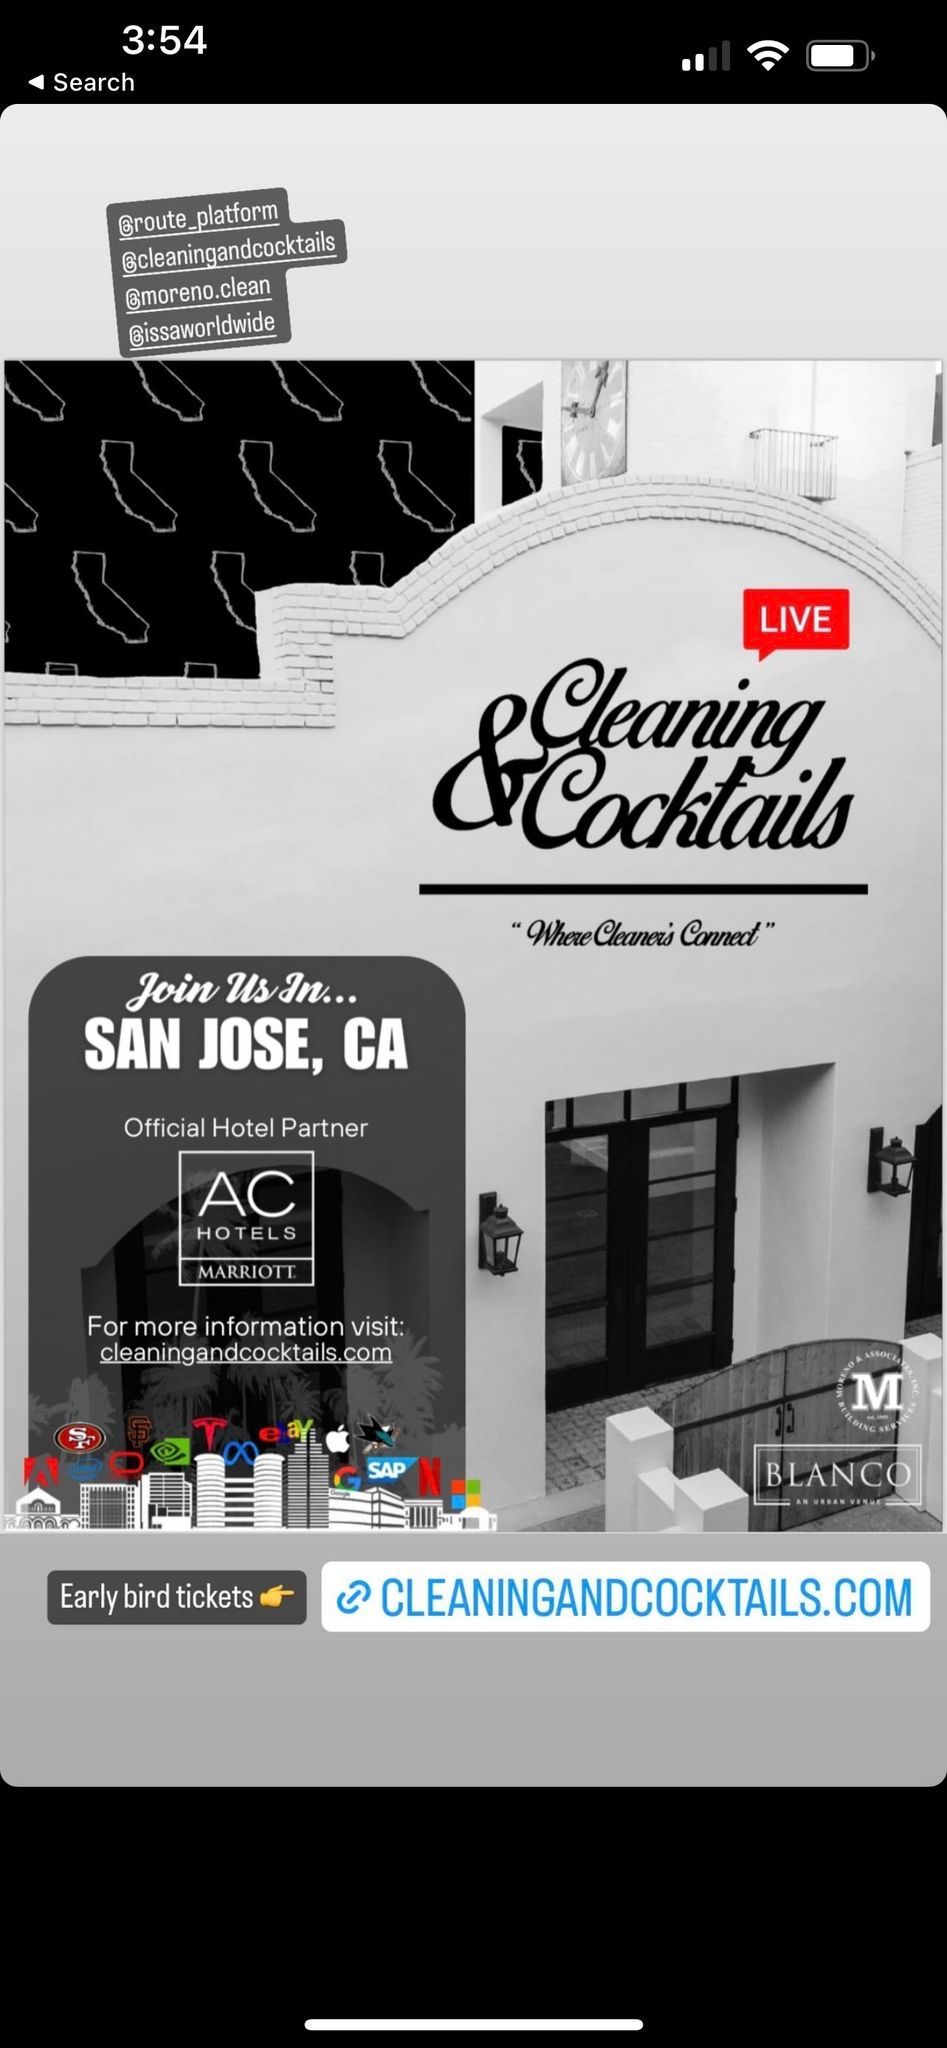 Cleaning and Cocktails LIVE 